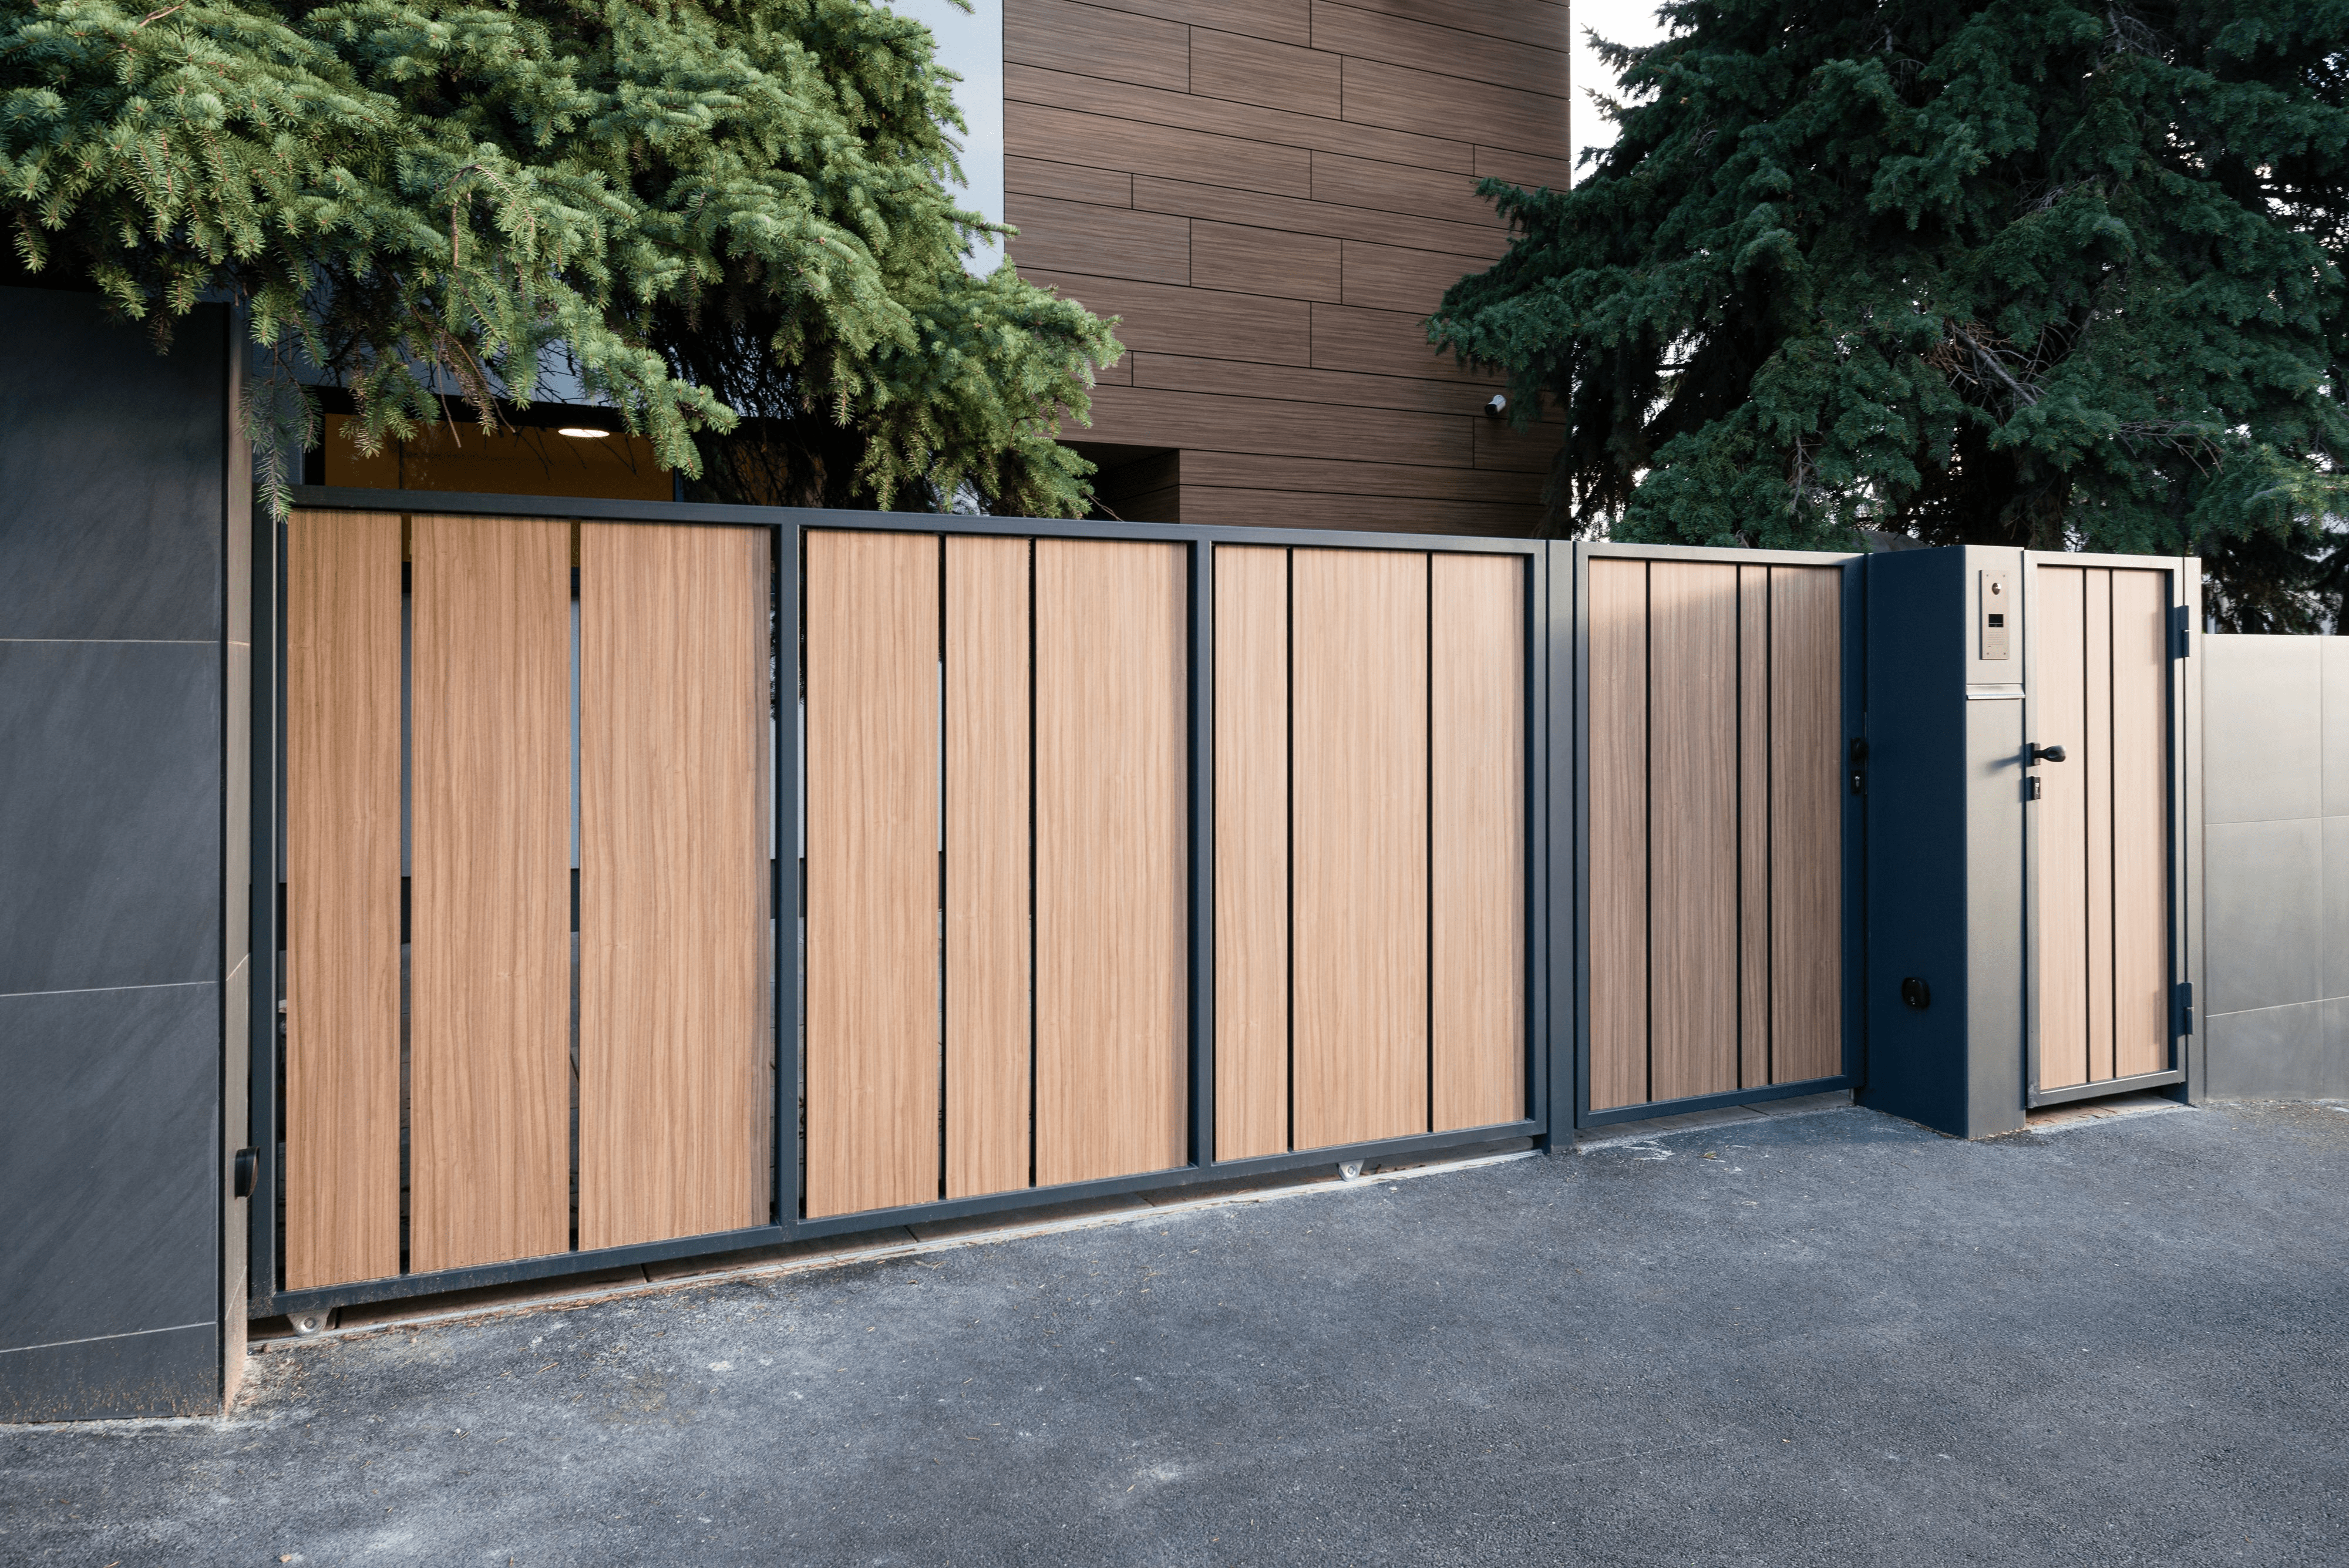 Folding Main Gate Designs With Lodged Wooden Panels  